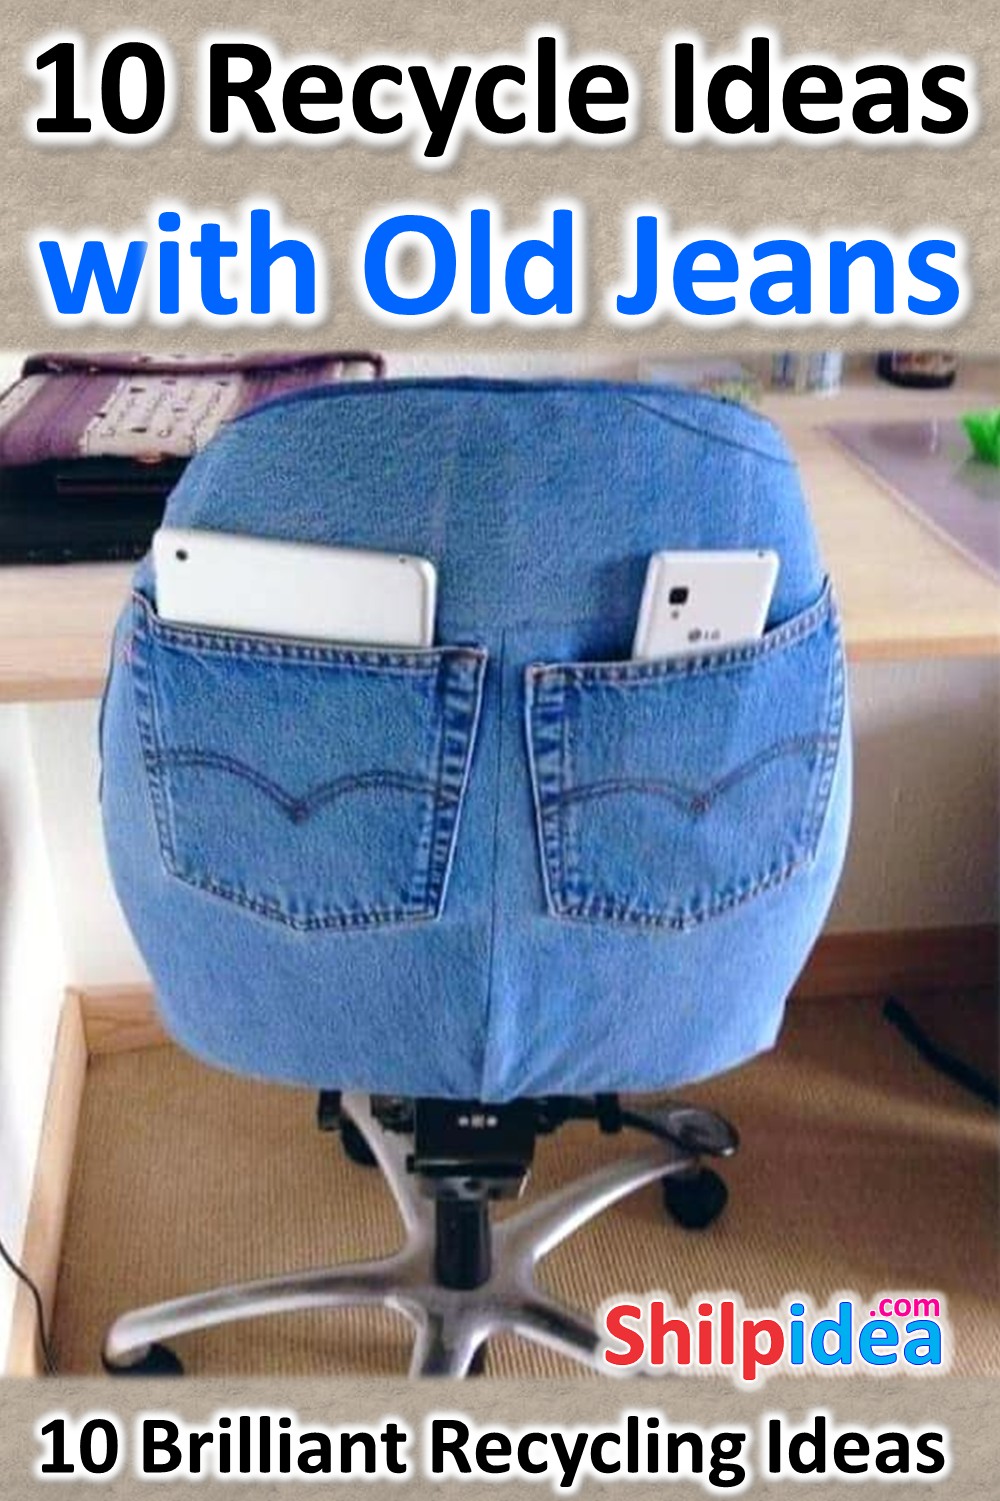 jeans-recycle-ideas-shilpidea-pin